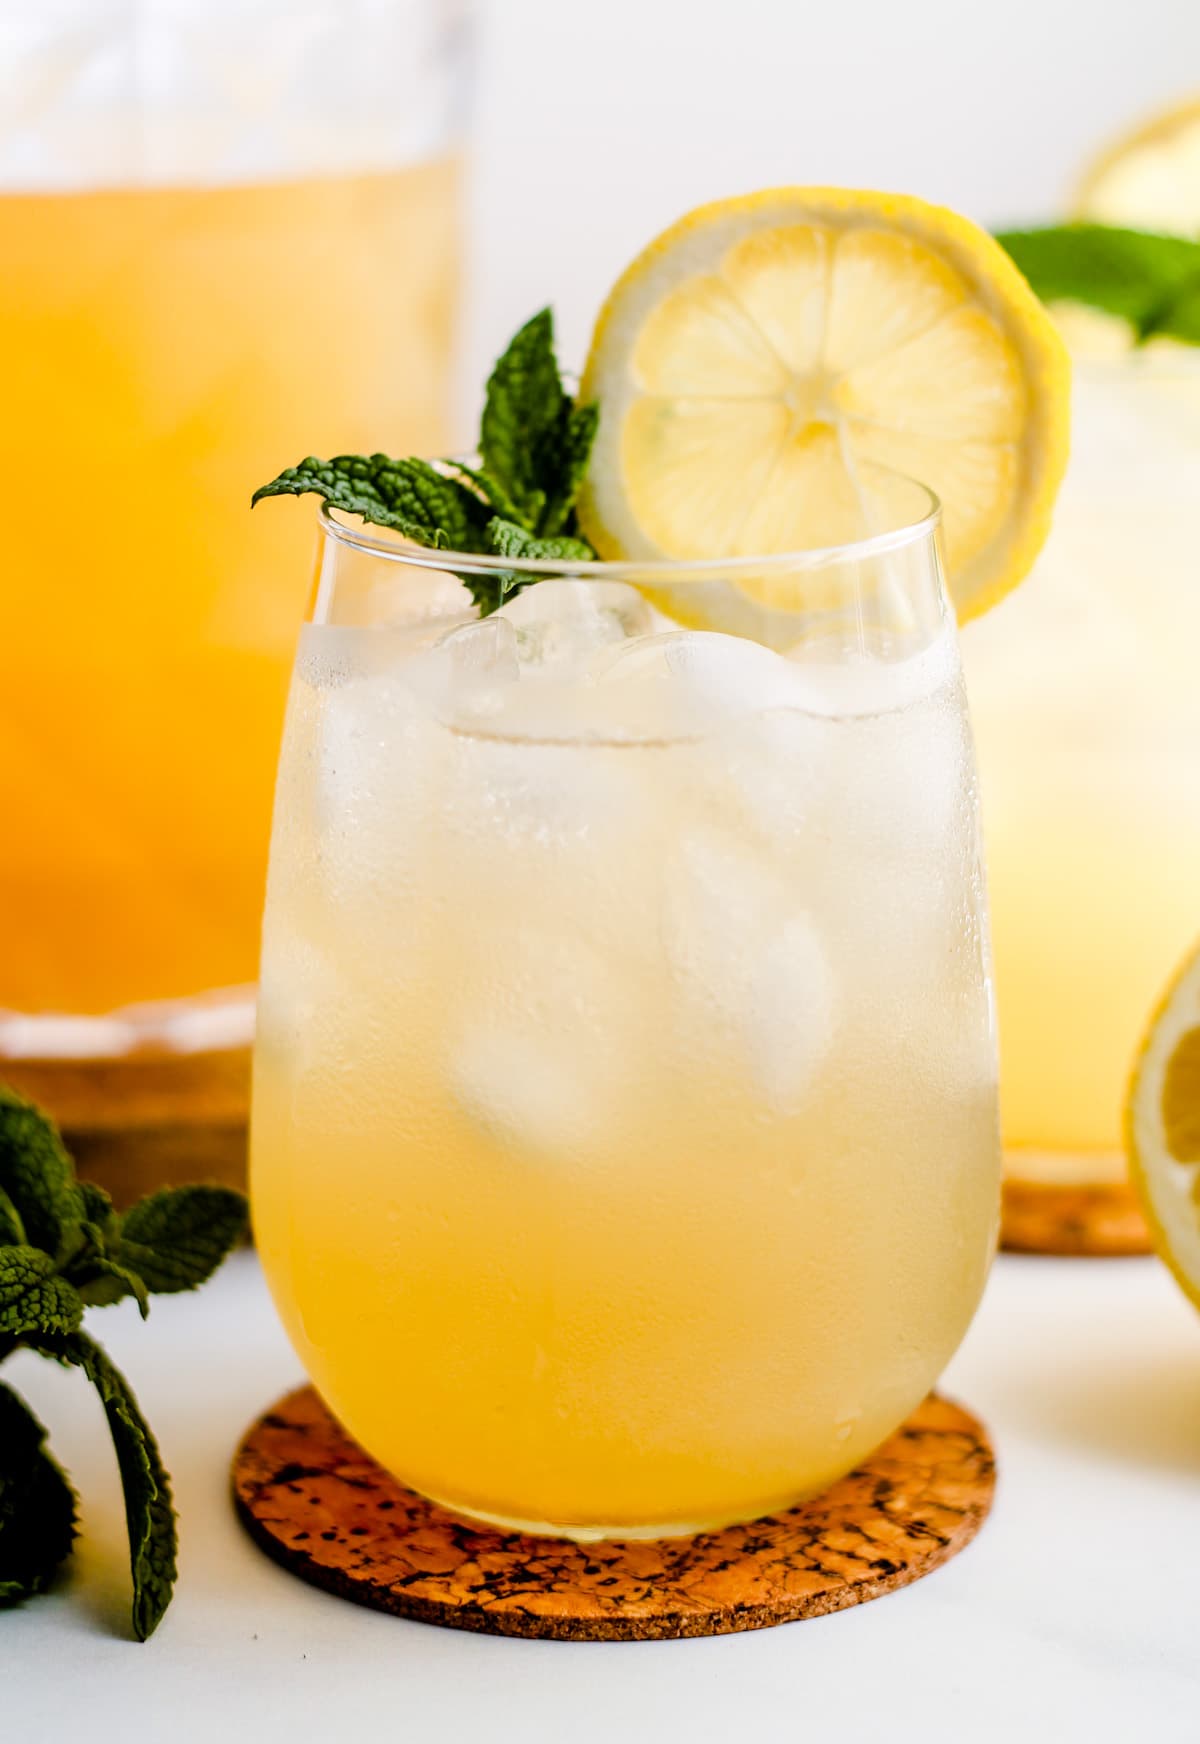 A glass of iced green tea garnished with lemon and mint.